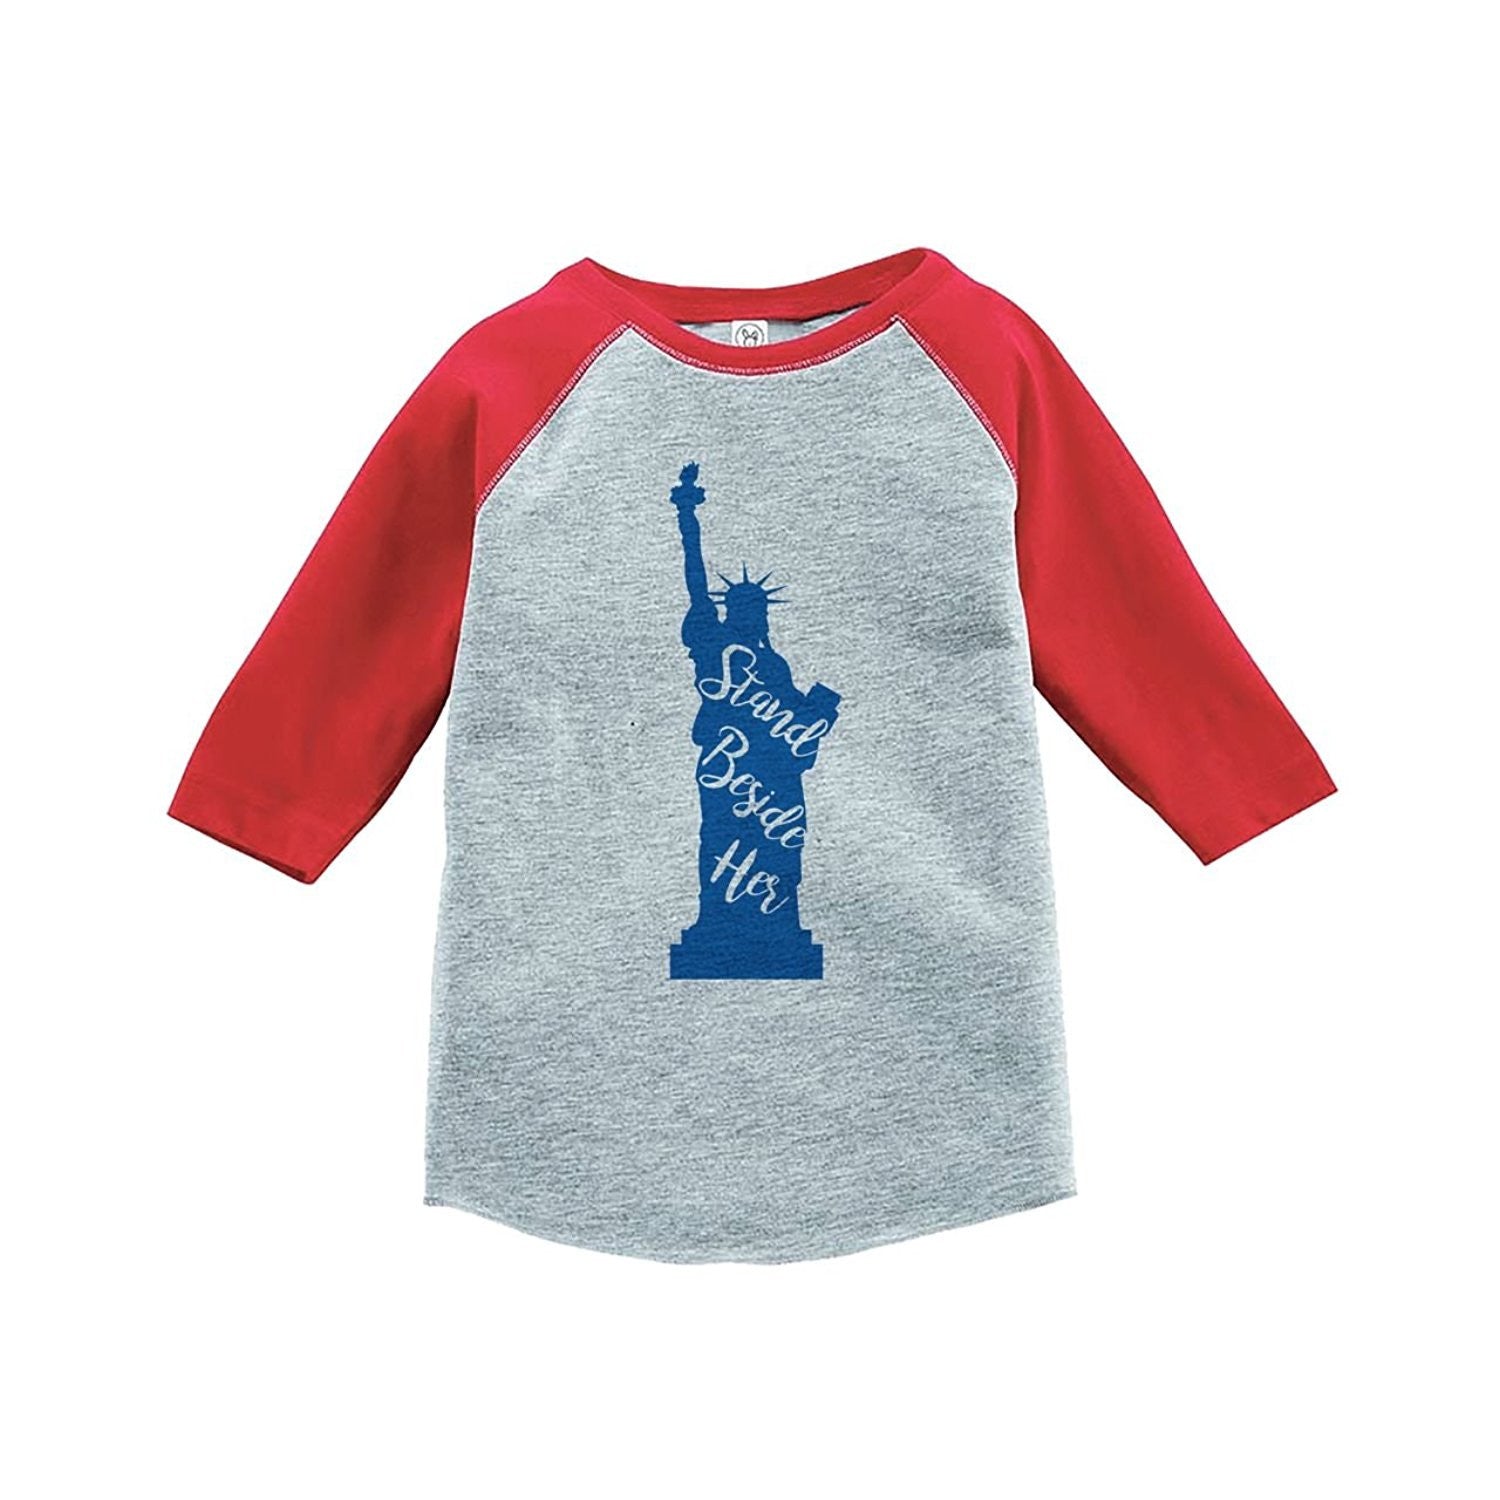 7 ate 9 Apparel Kids Statue of Liberty 4th of July Red Baseball 